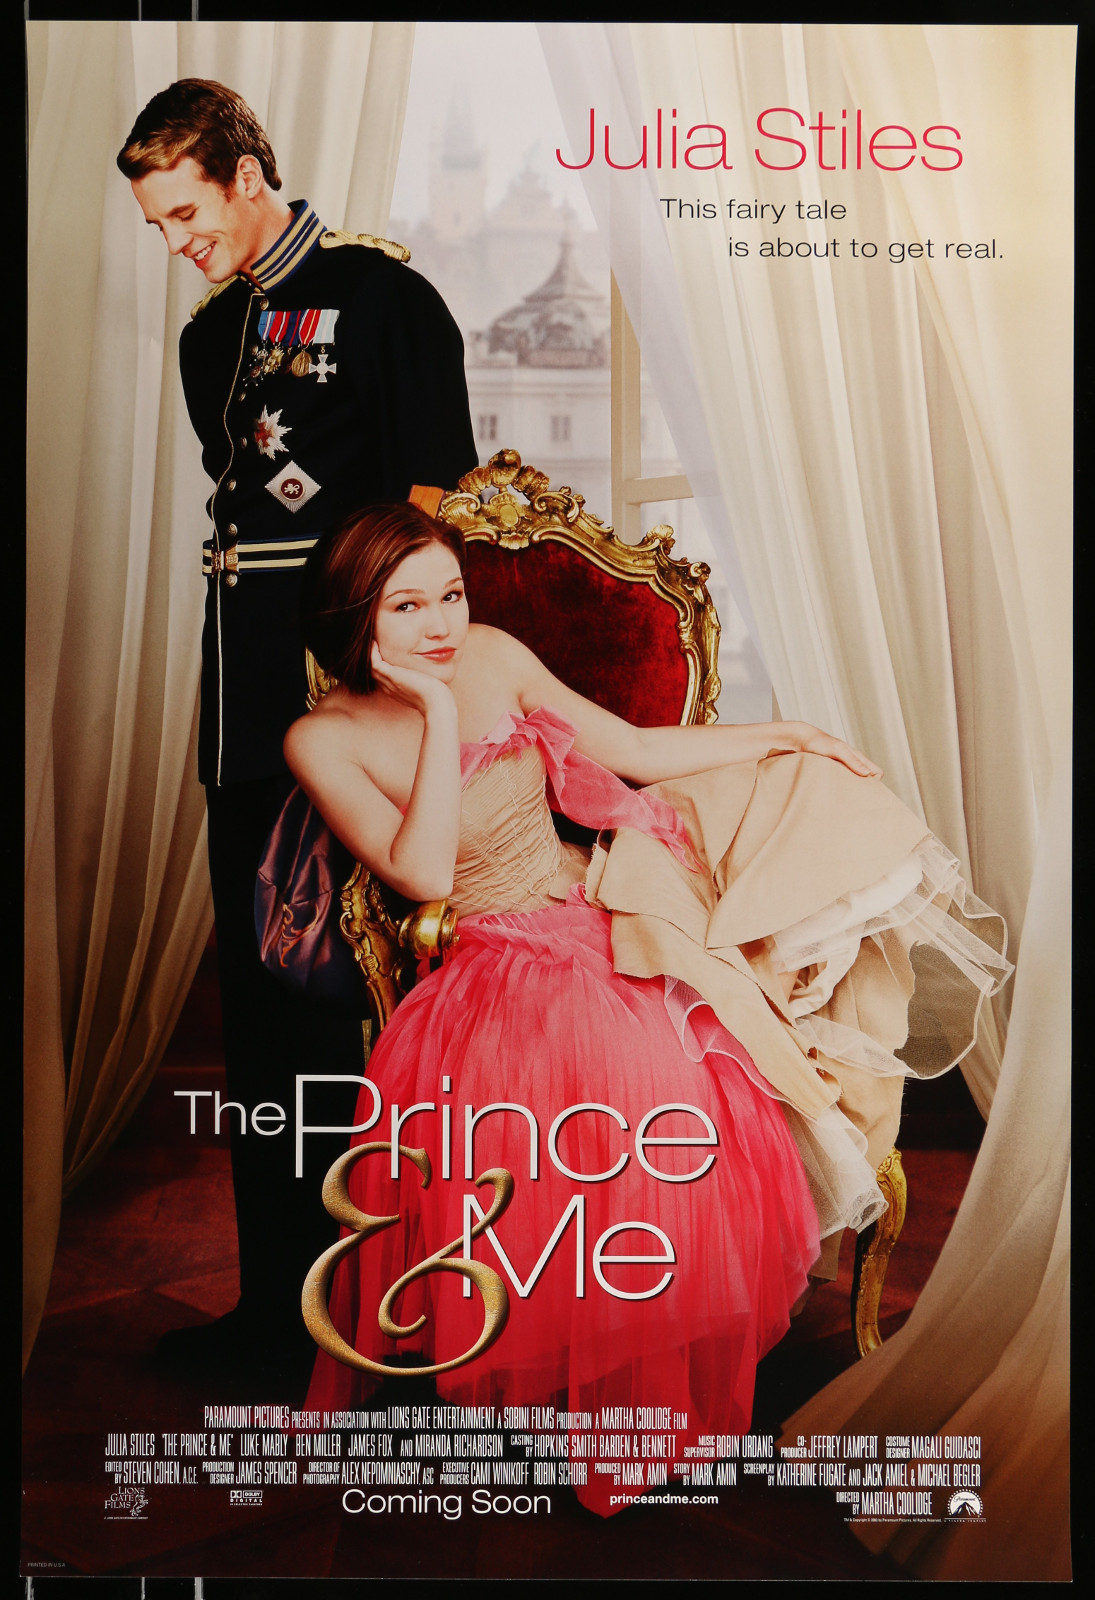 The Prince & Me 2A364 A Part Of A Lot 29 Unfolded Mostly Single-Sided 27X40 One-Sheets '90S-00S Great Movie Images!